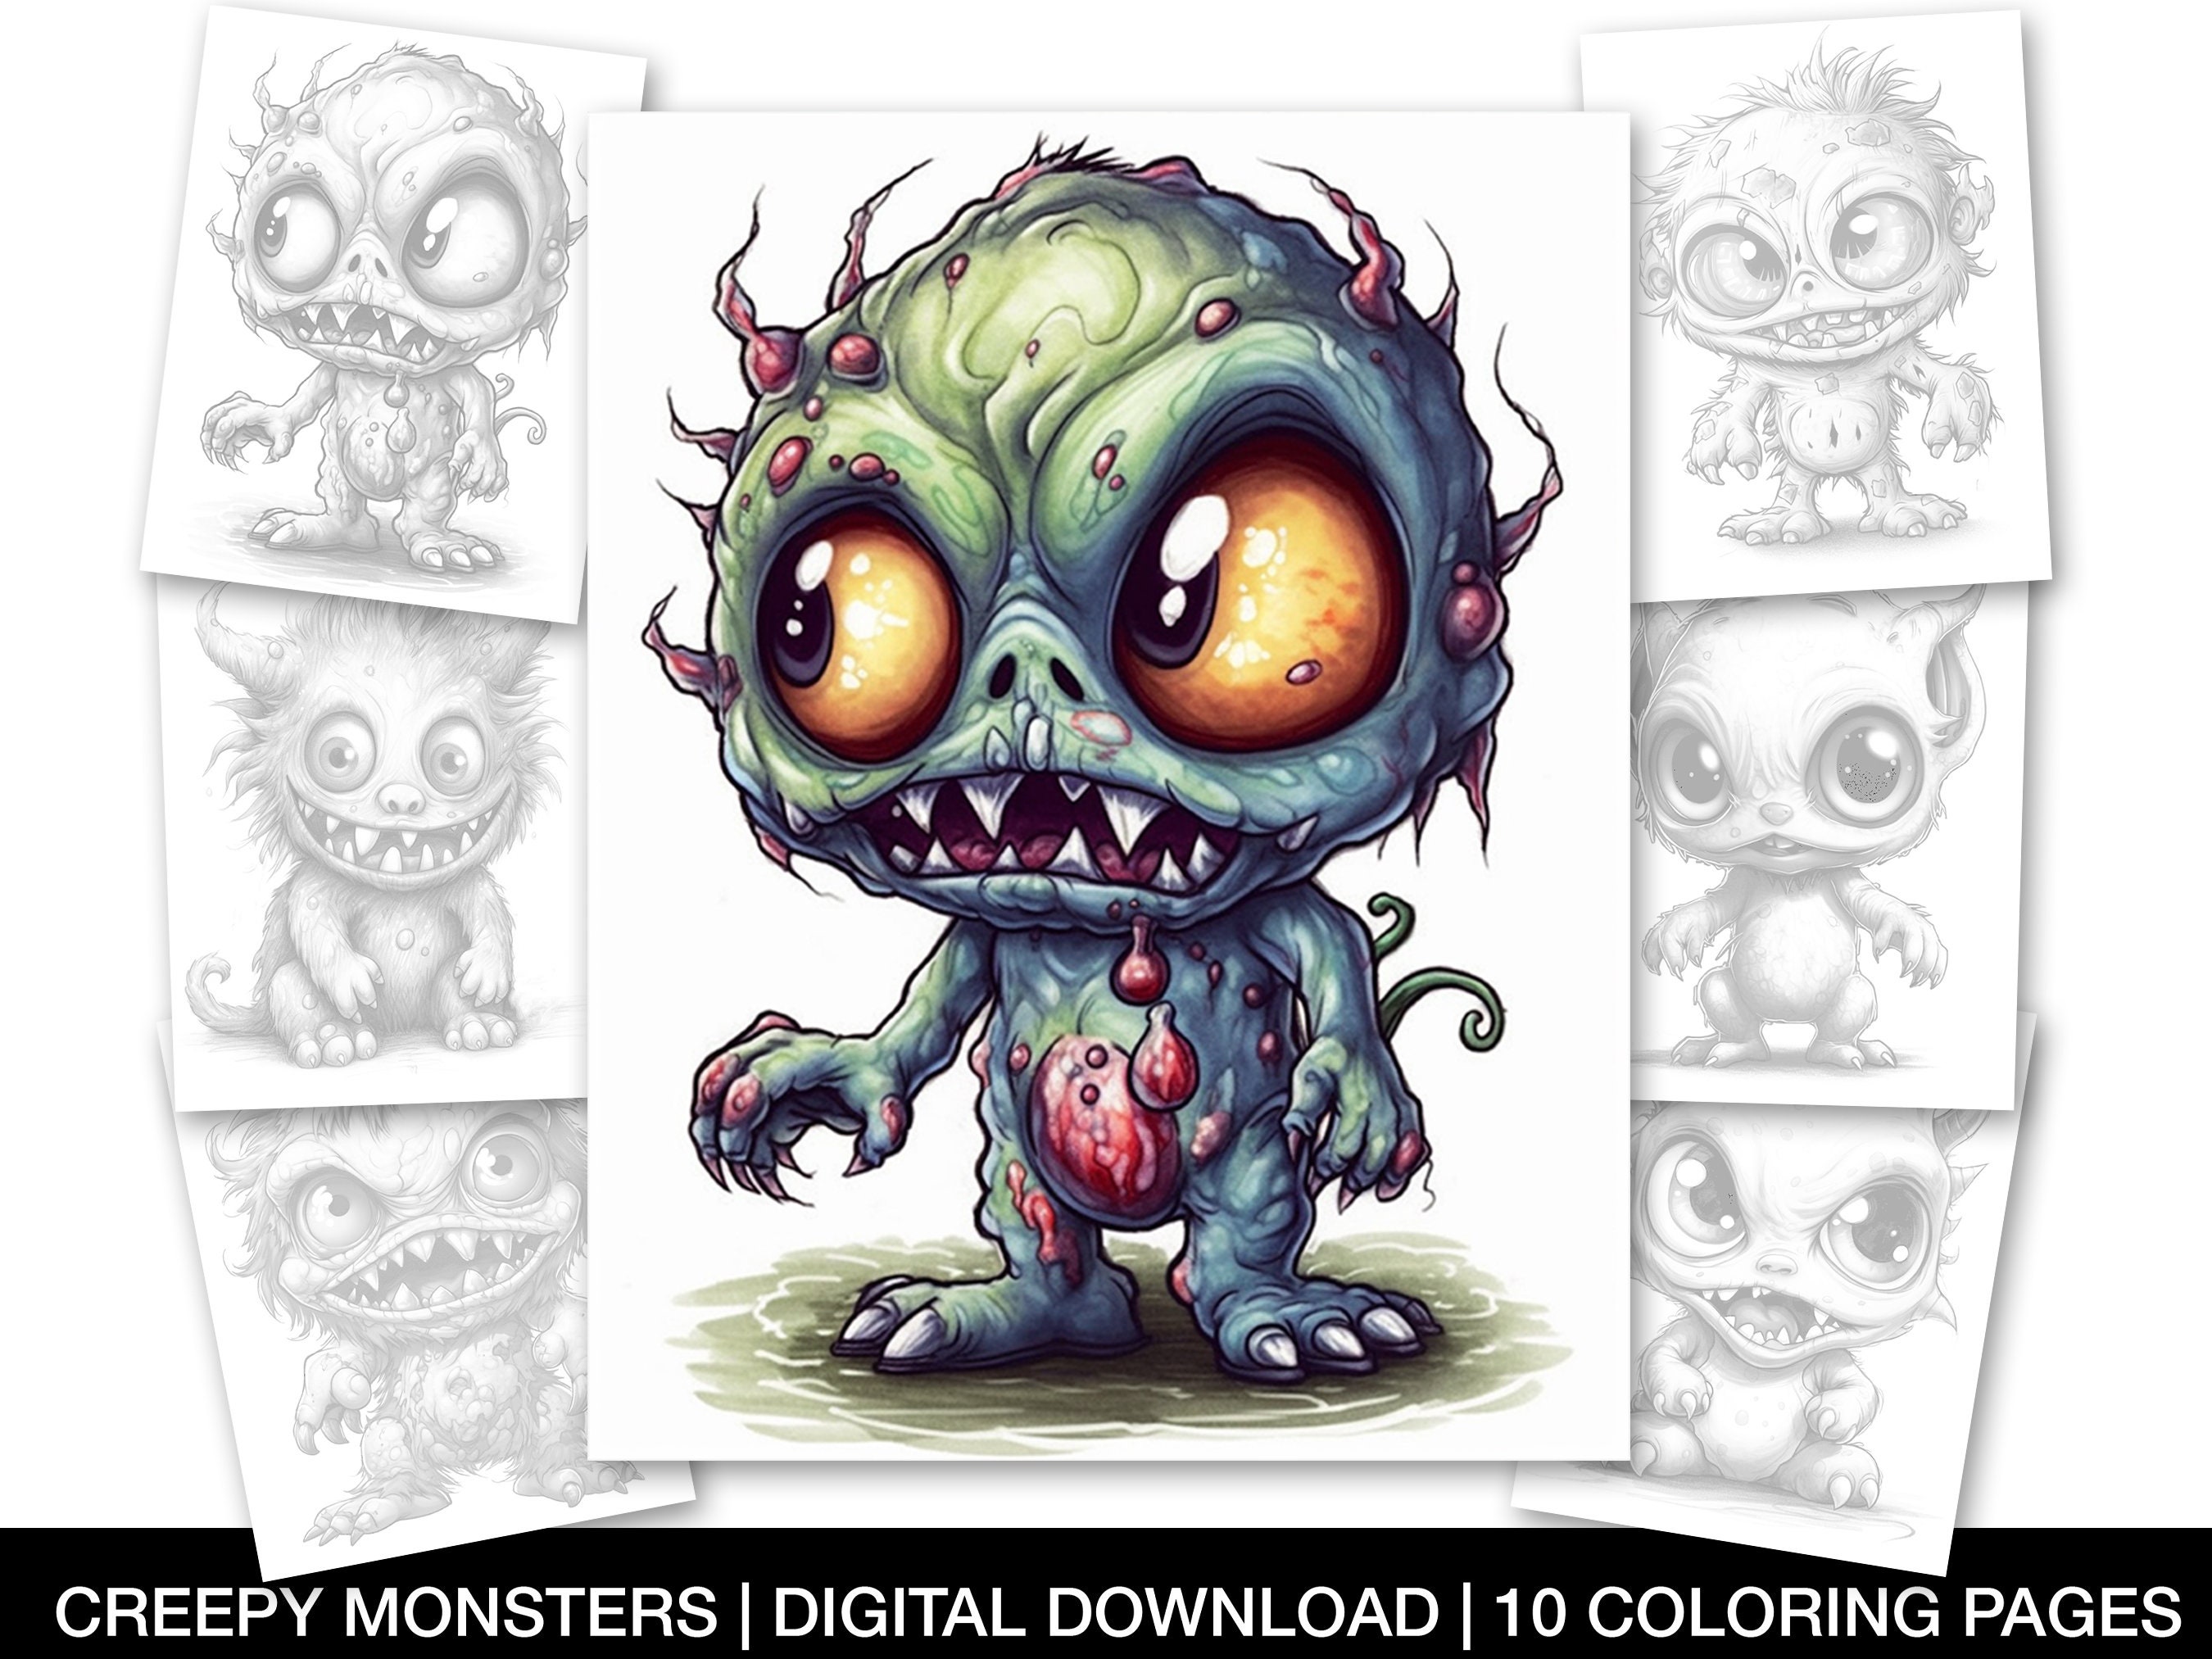 50 Adorable Creepy Monsters Coloring Book V2: for Adults and